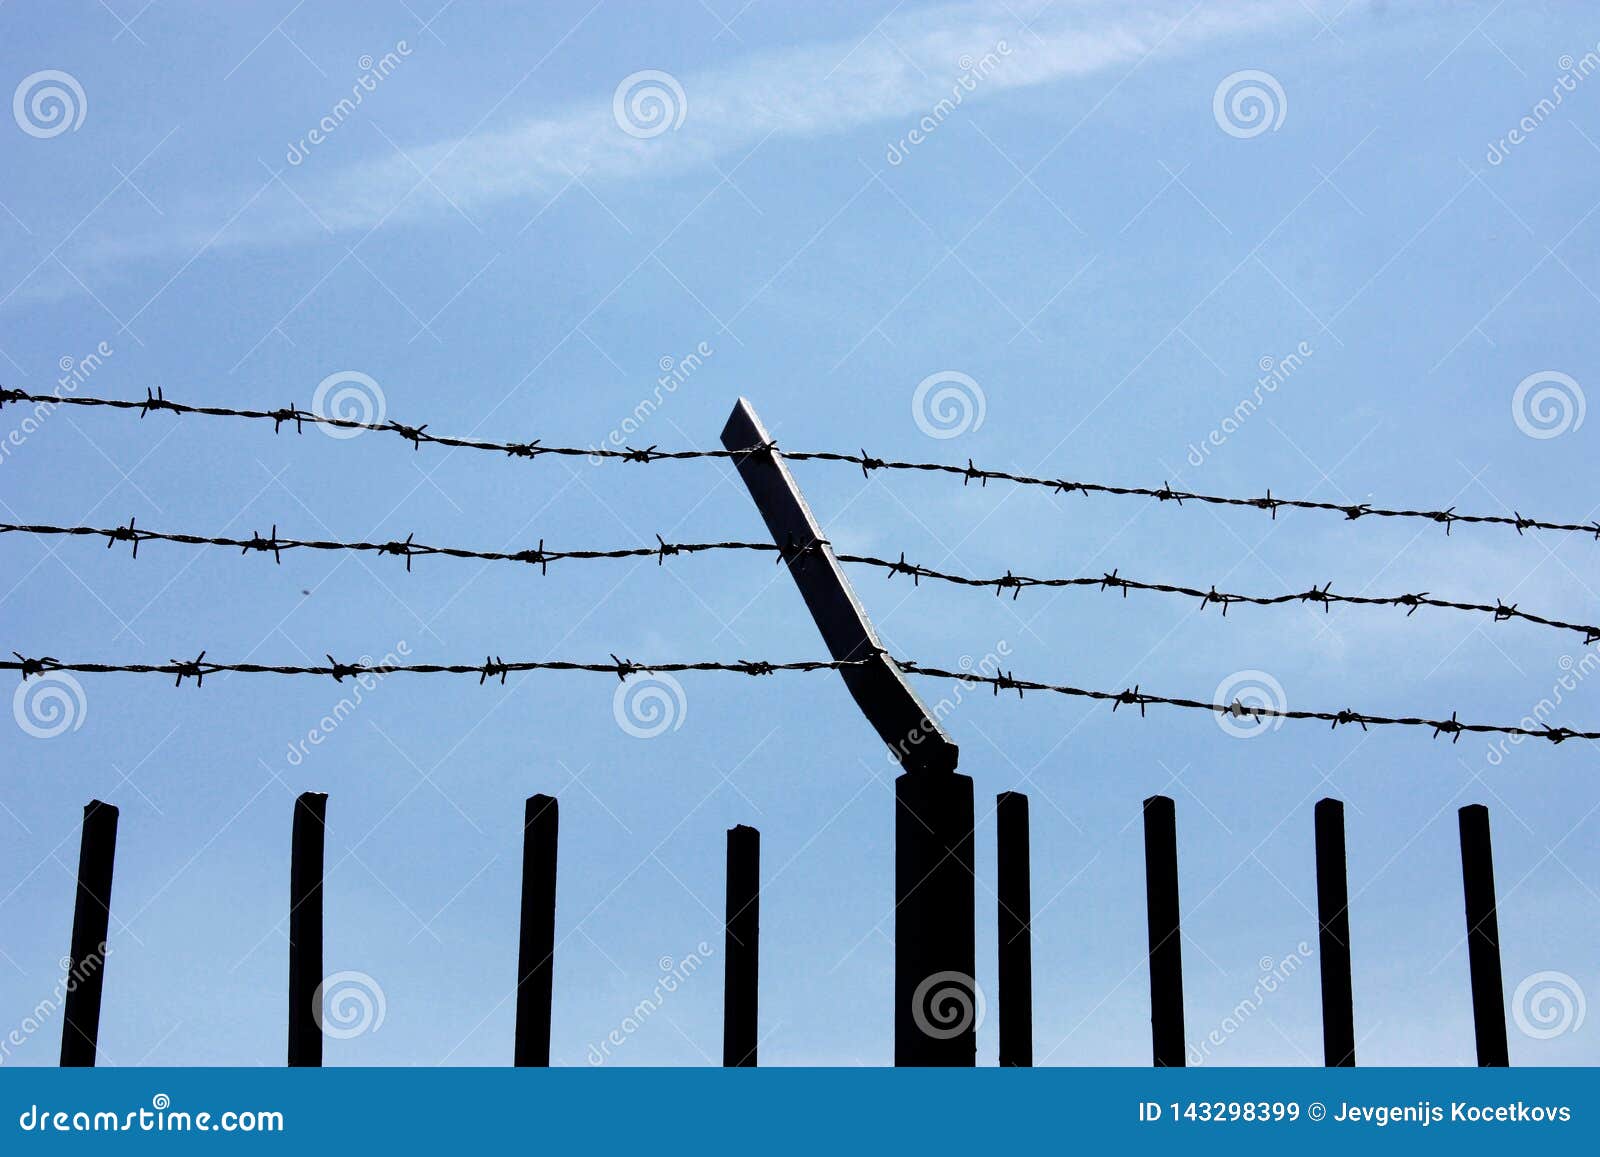 Fence With Barbed Wire Against The Blue Sky. Symbol Of Freedom Of ...
